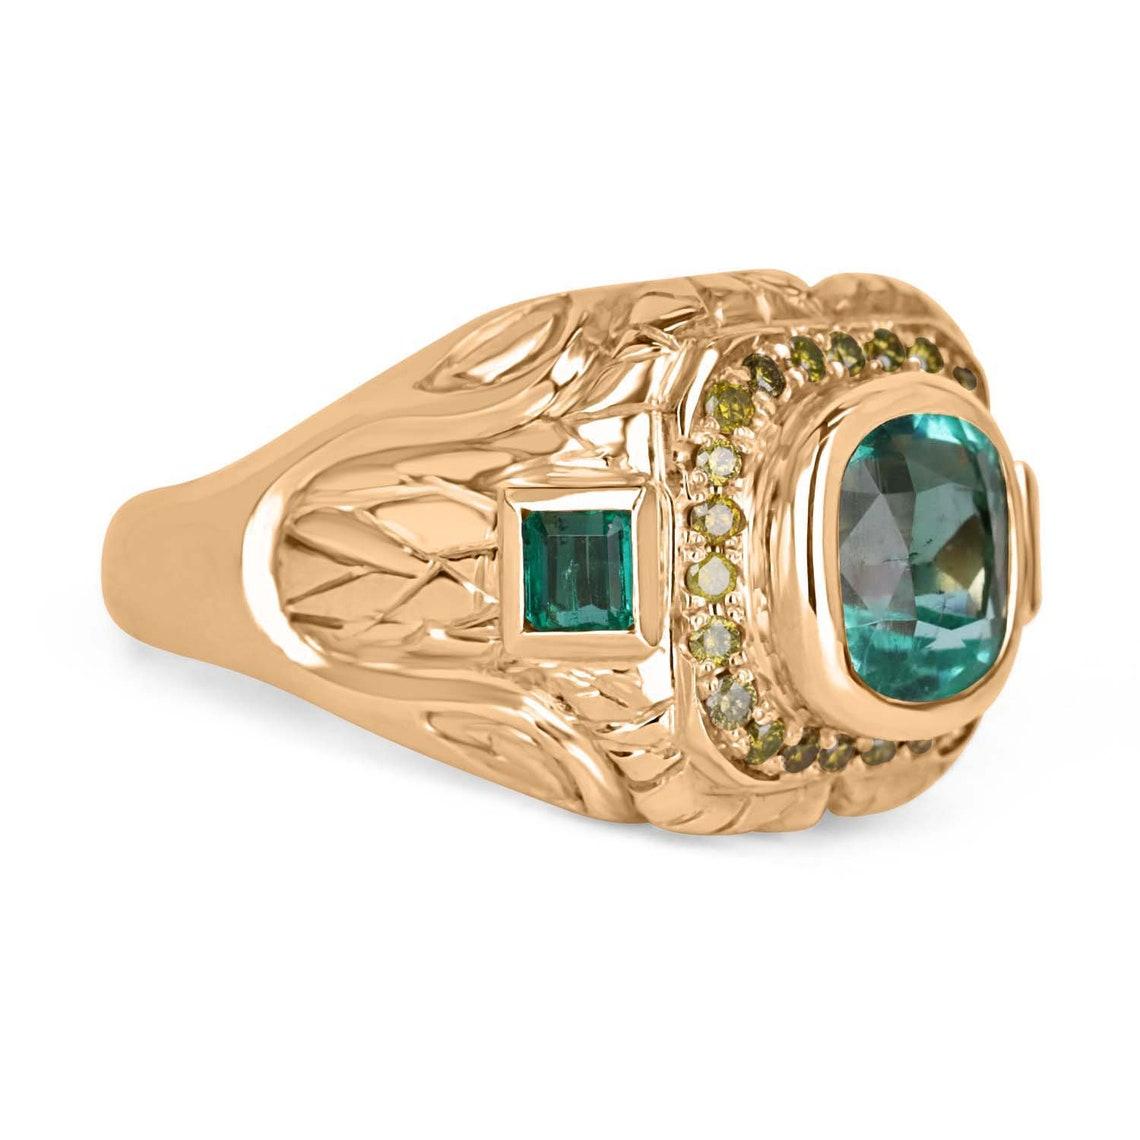 Setting Style: Men's Bezel-Set Rings
Setting Material: 14K Yellow Gold
Gold Weight: 15.5 grams

Main Stone: Colombian Emerald
Shape: Cushion - Square Cut
Approx Center Emerald: 3.14-Carats
Approx Accenting Emerald: 0.60-carats
Total Emeralds: 3
Eye